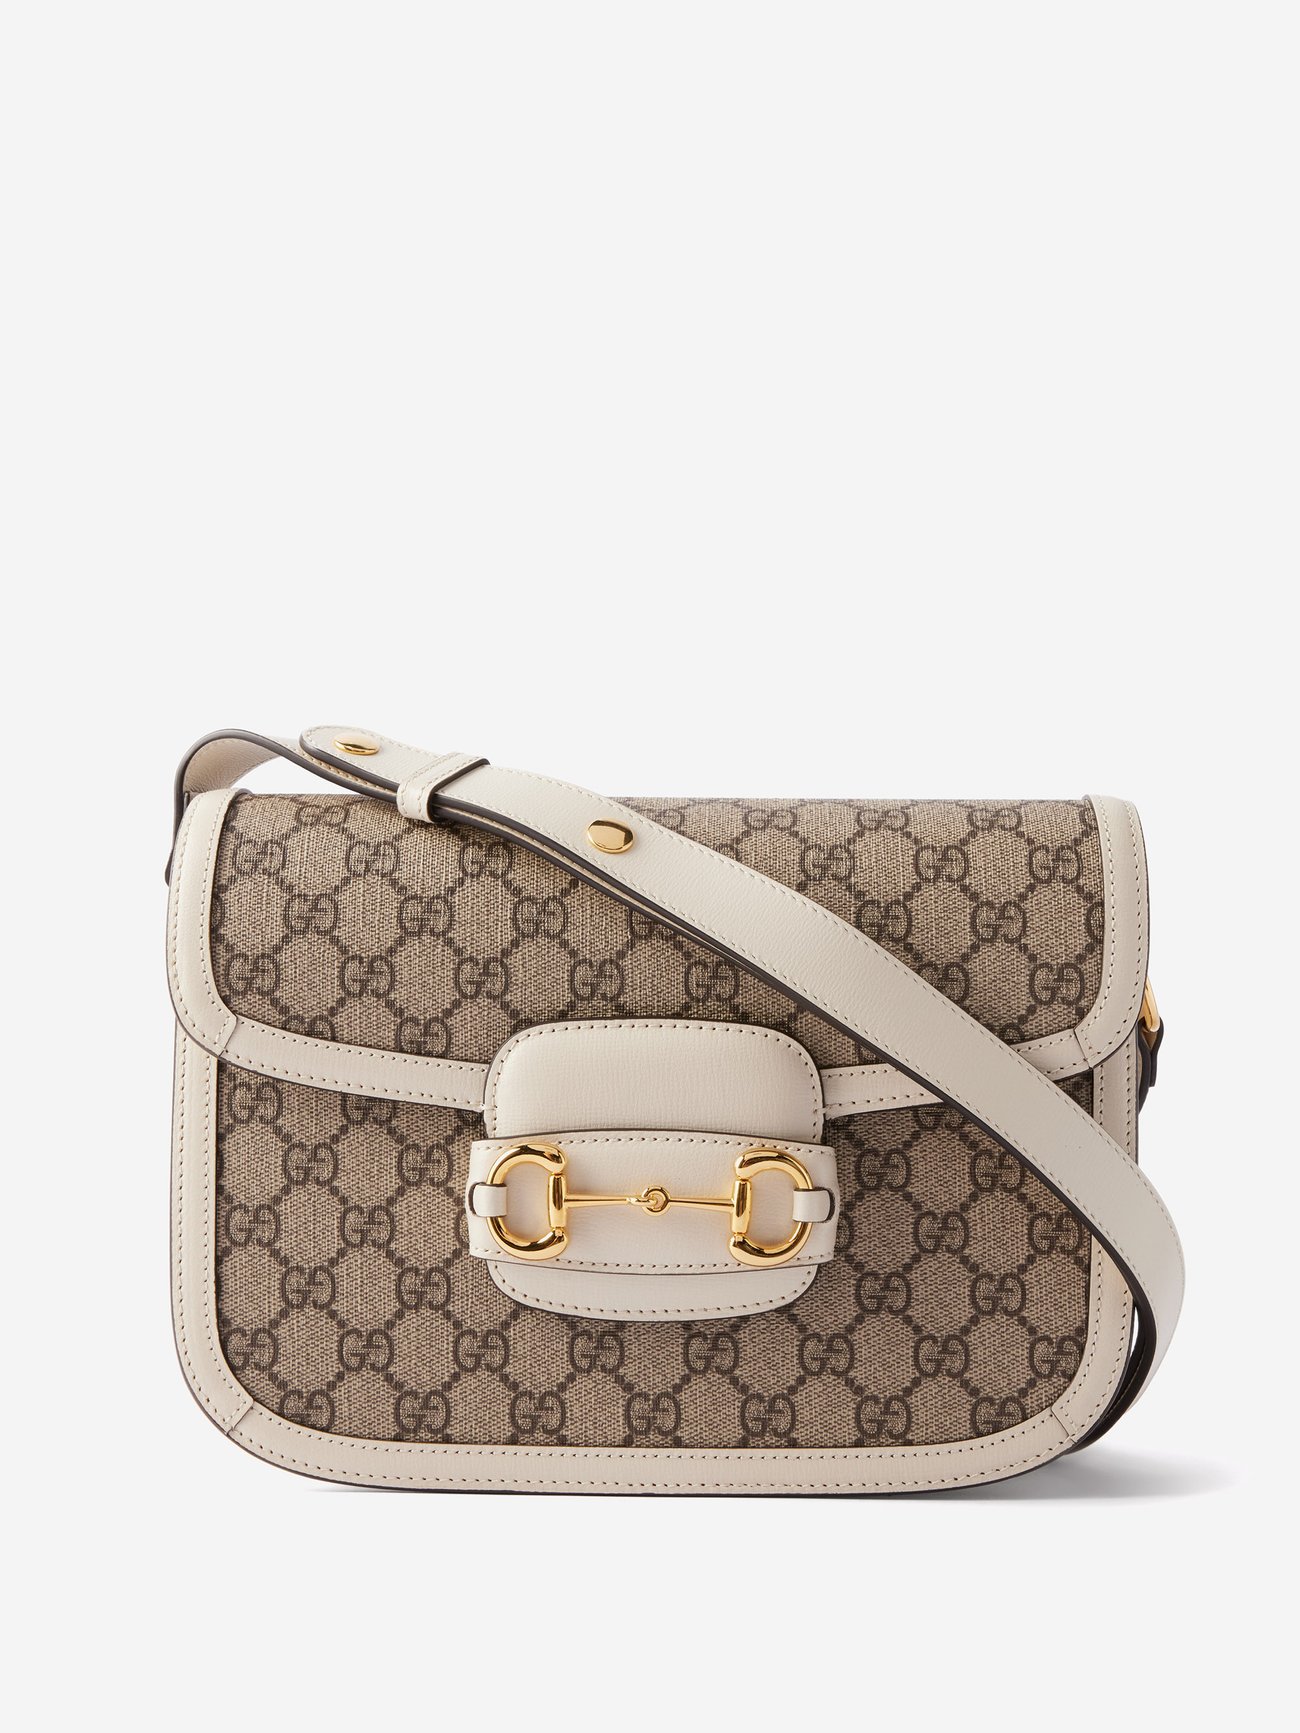 Gucci 1955 Horsebit: the shoulder bag every girl will carry in 2020